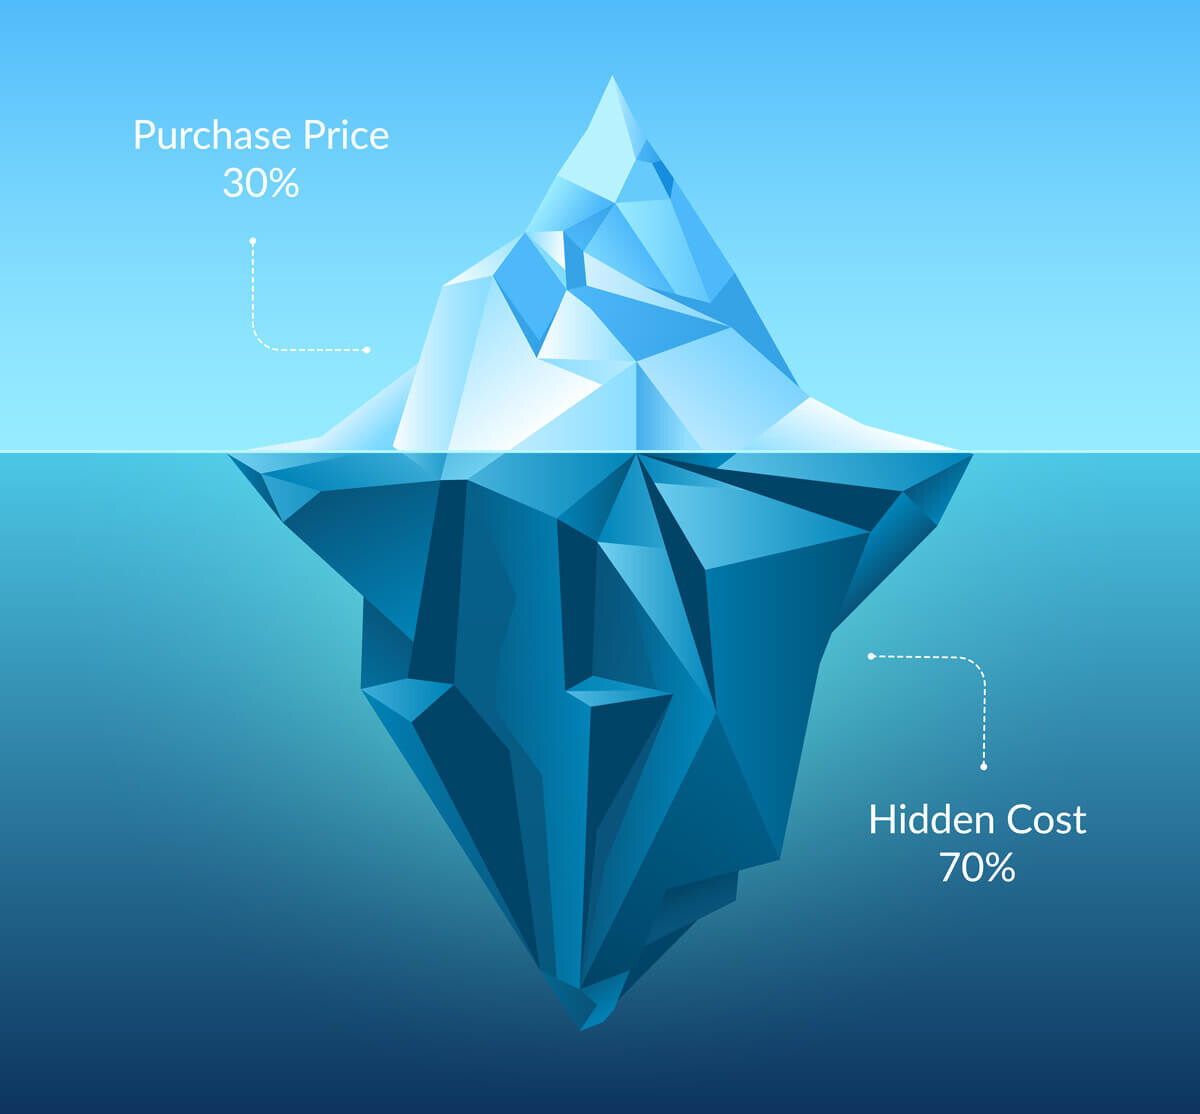 Iceberg theorie for TCO (Total Cost of Ownership)